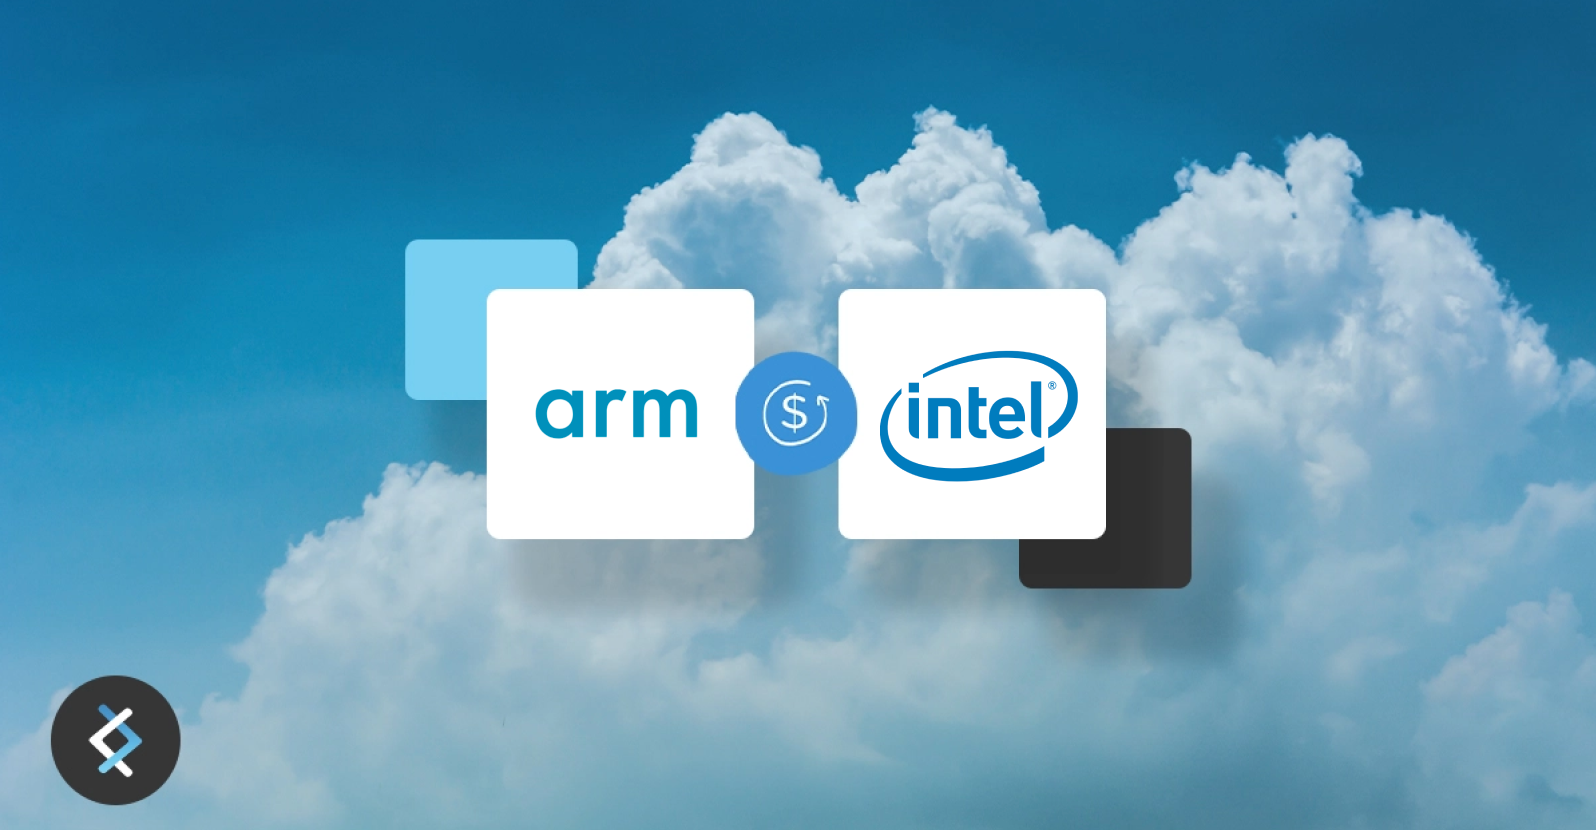 Background photo of clouds, on top are logos for arm and intel, with a cost icon between them